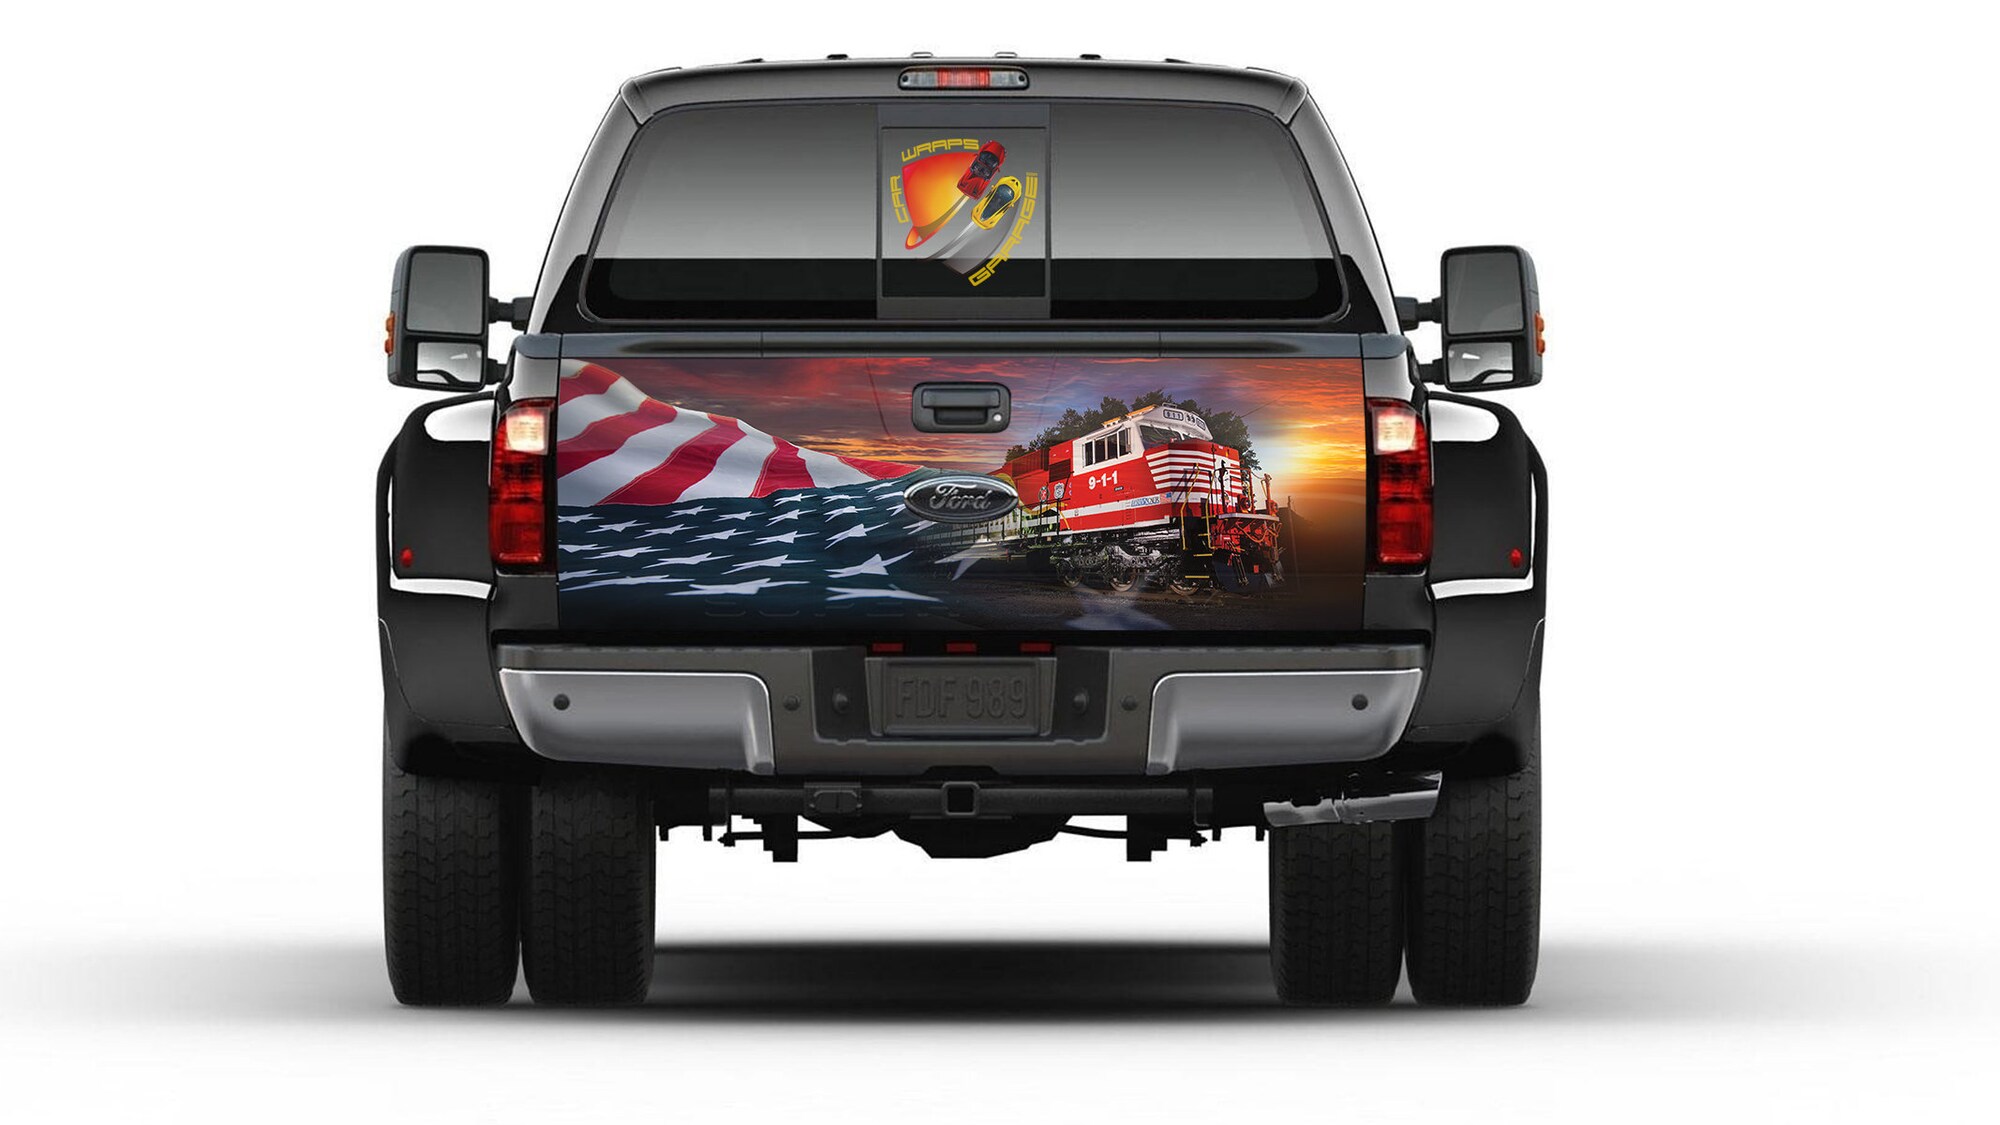 American Flag First Responders 911 Tailgate Truck Bed Decal